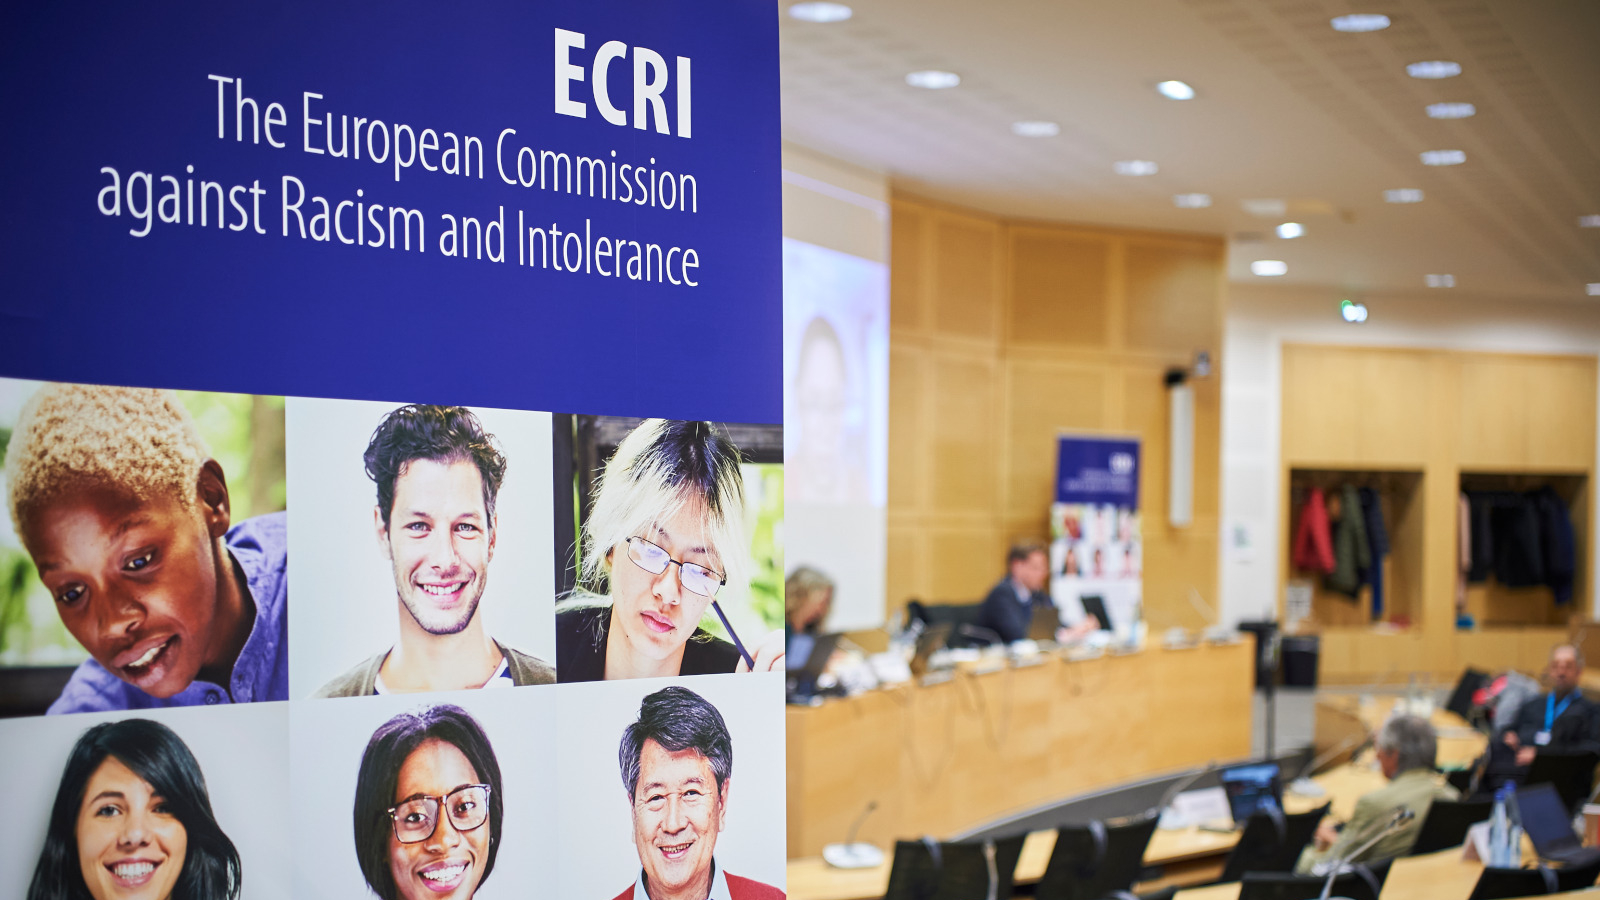 Statement of the European Commission against Racism and Intolerance (ECRI) on the consequences of the aggression of the Russian Federation against Ukraine